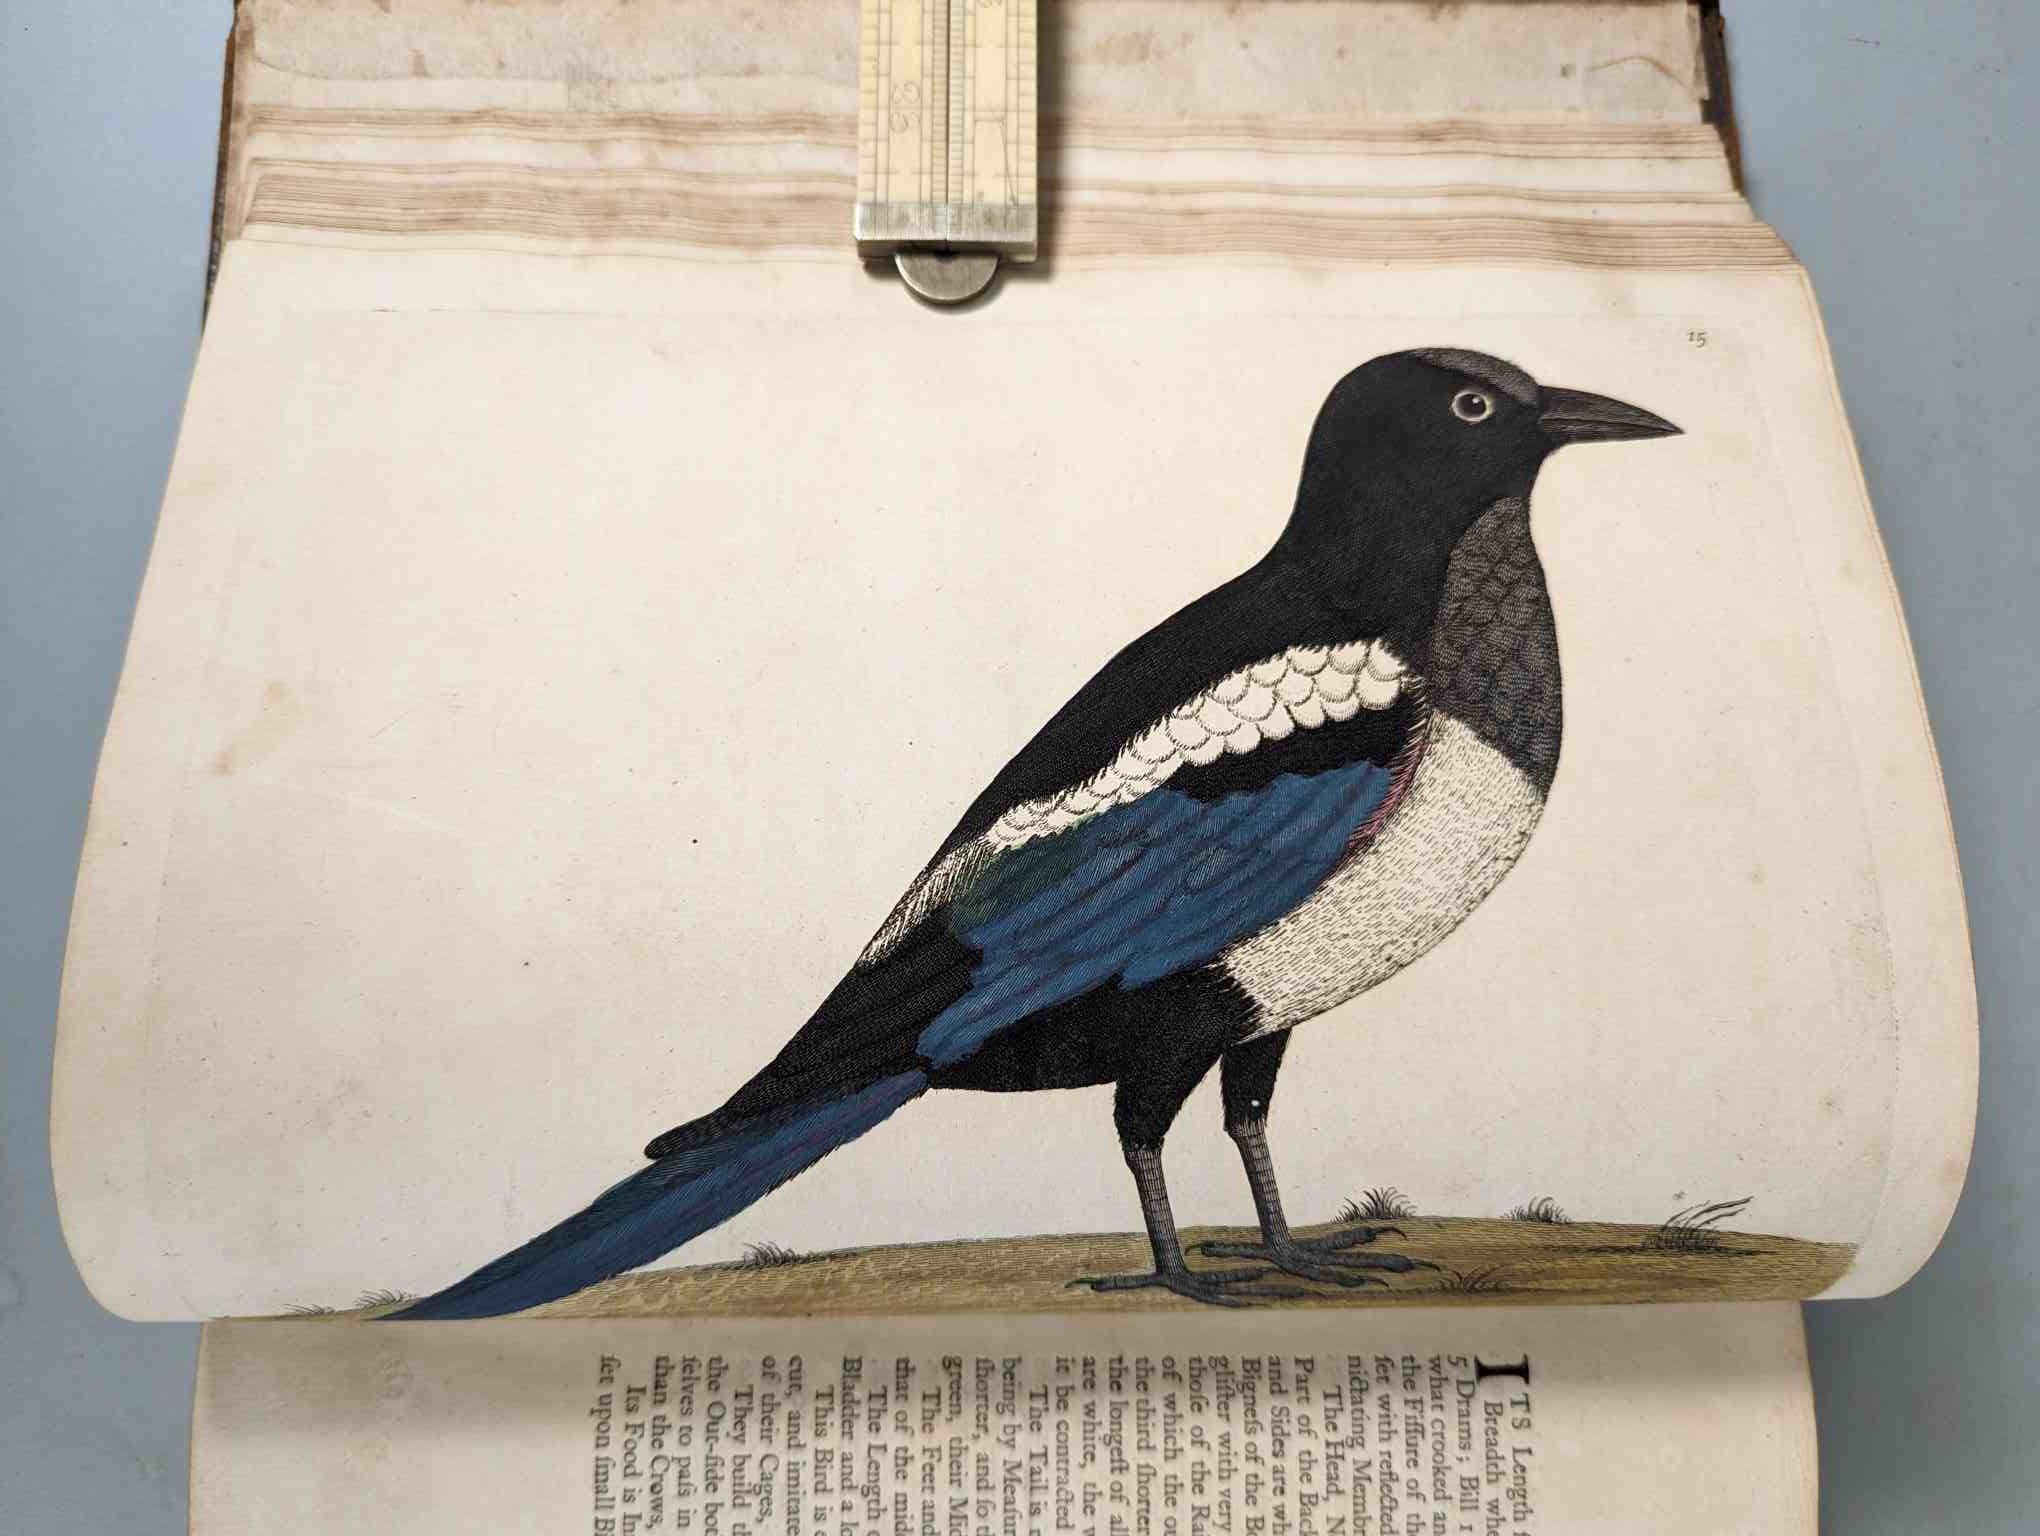 ALBIN, Eleazar. A Natural History of Birds, to which are added, Notes and Observations by W. - Image 18 of 208